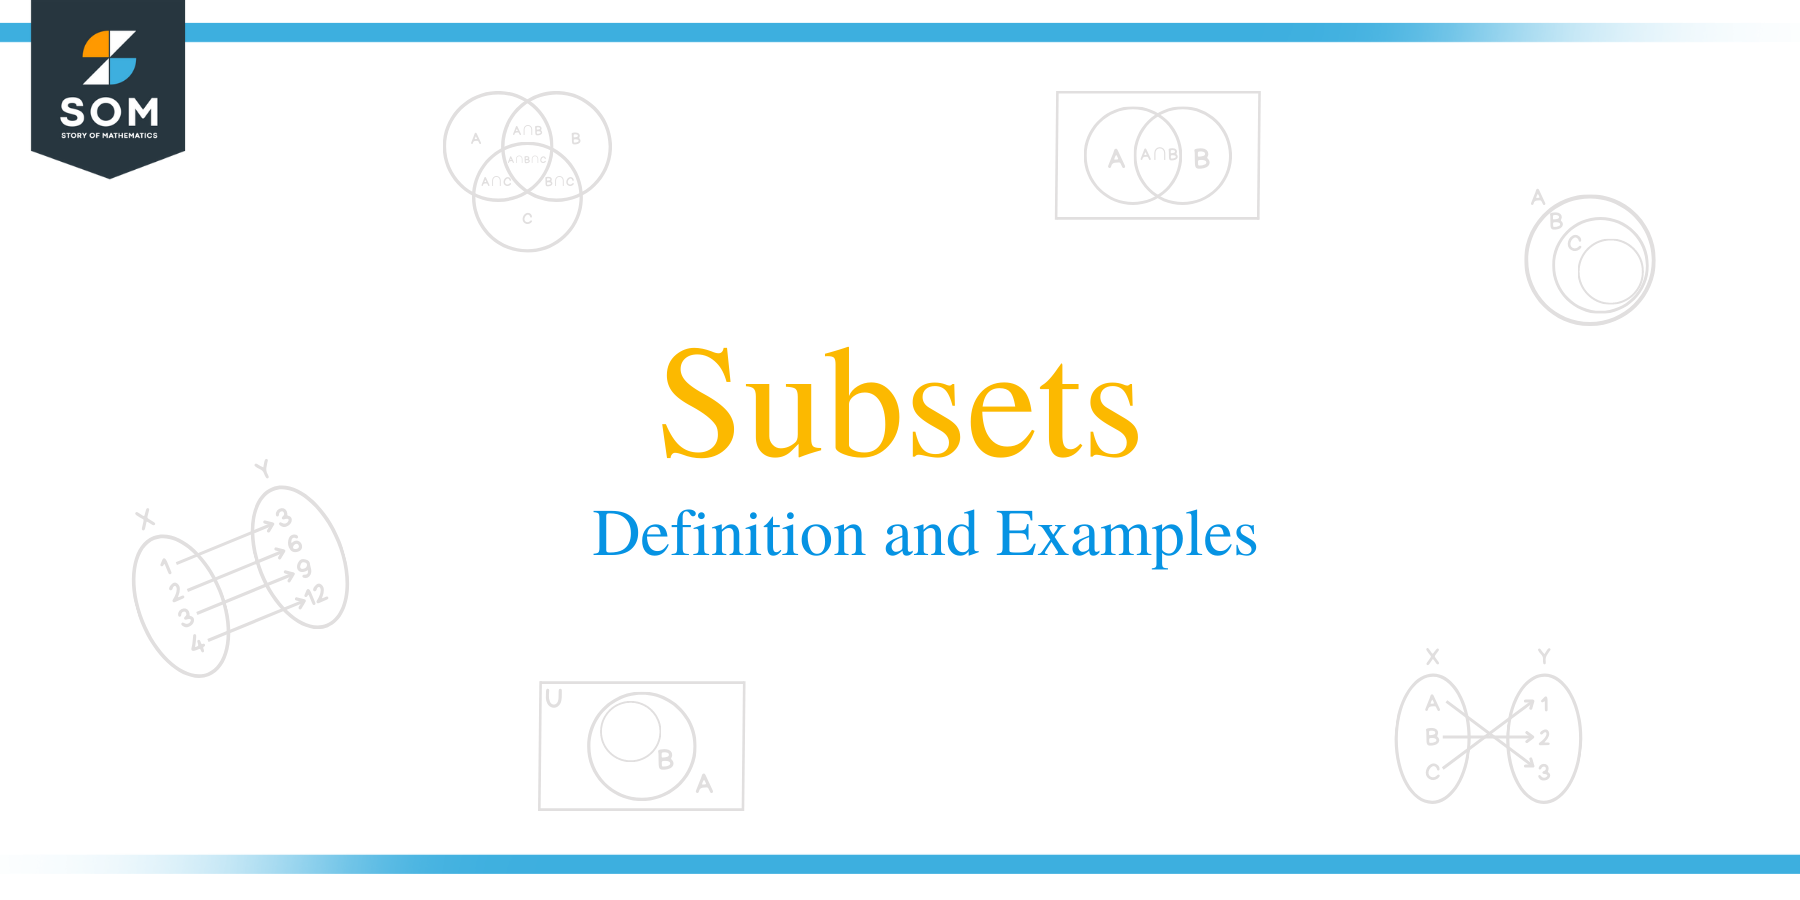 Subsets